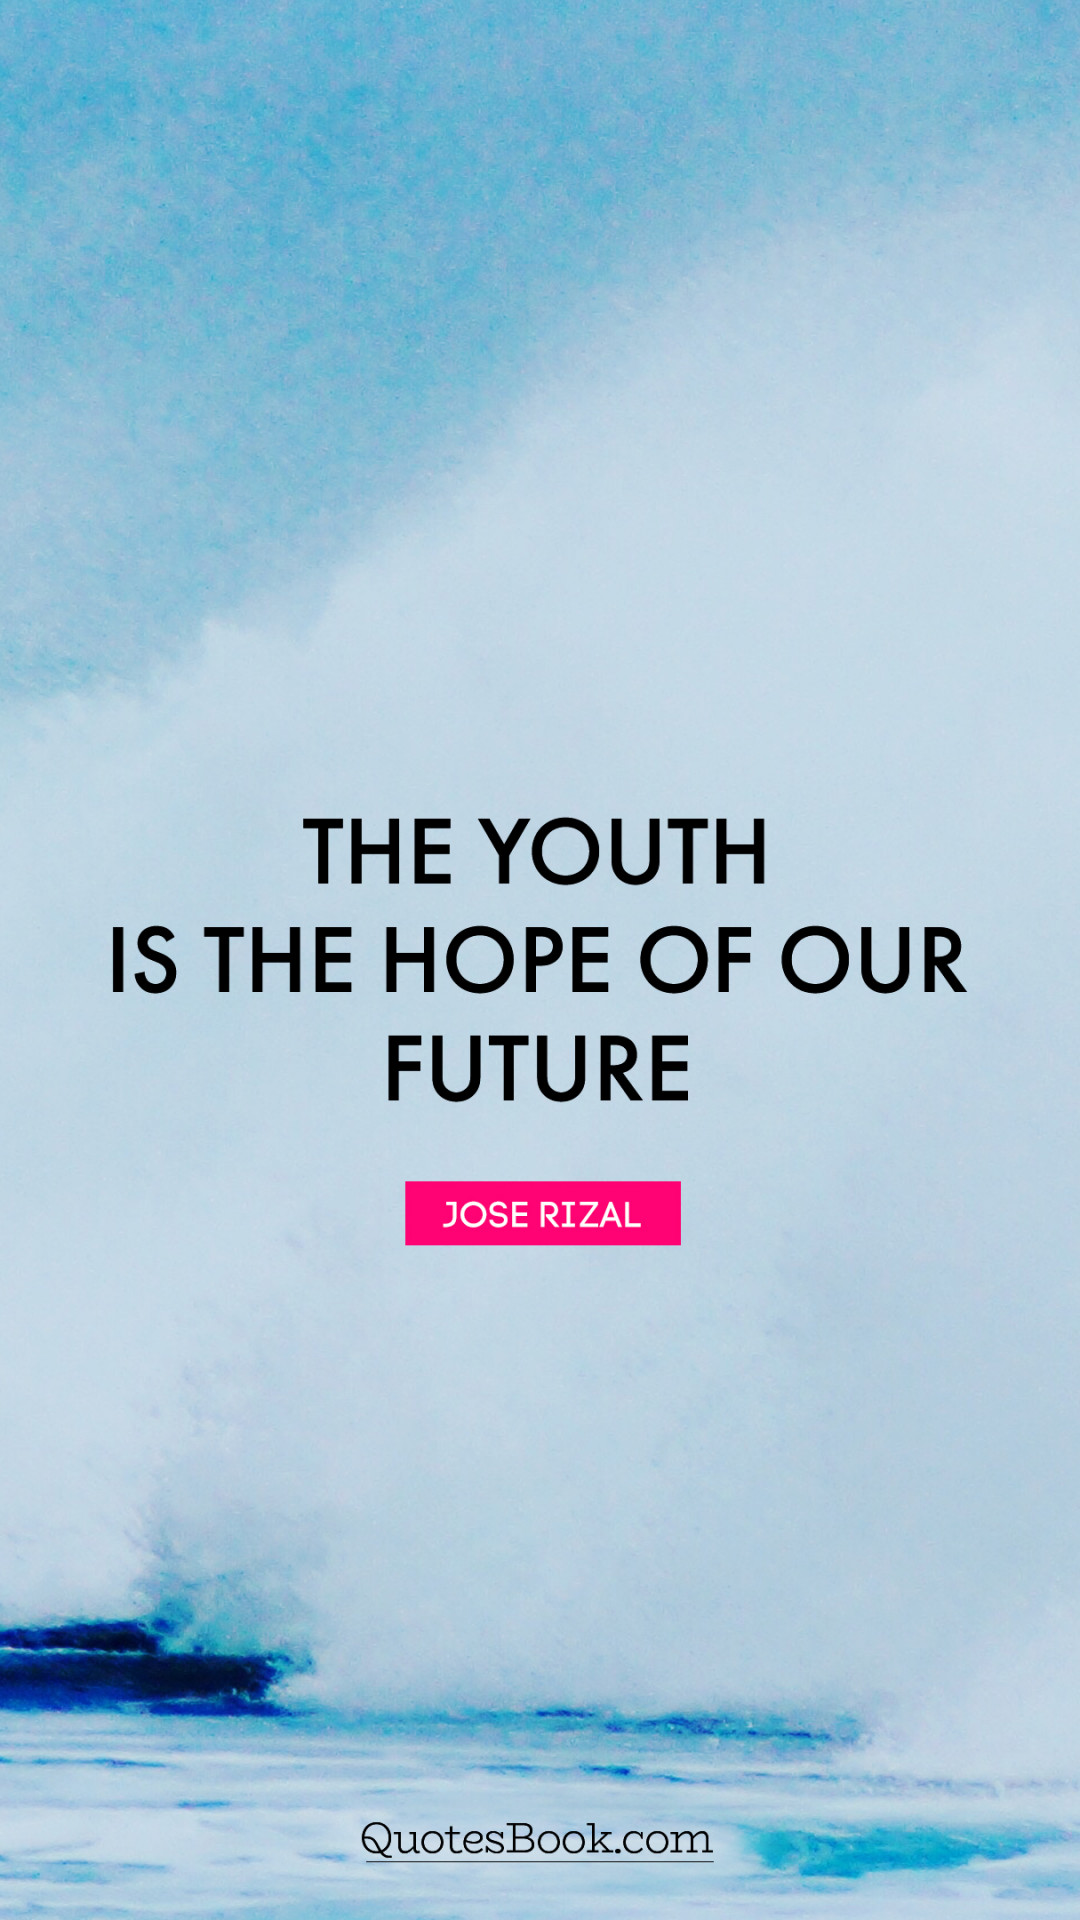 The youth is the hope of our future. - Quote by Jose Rizal - Page 8